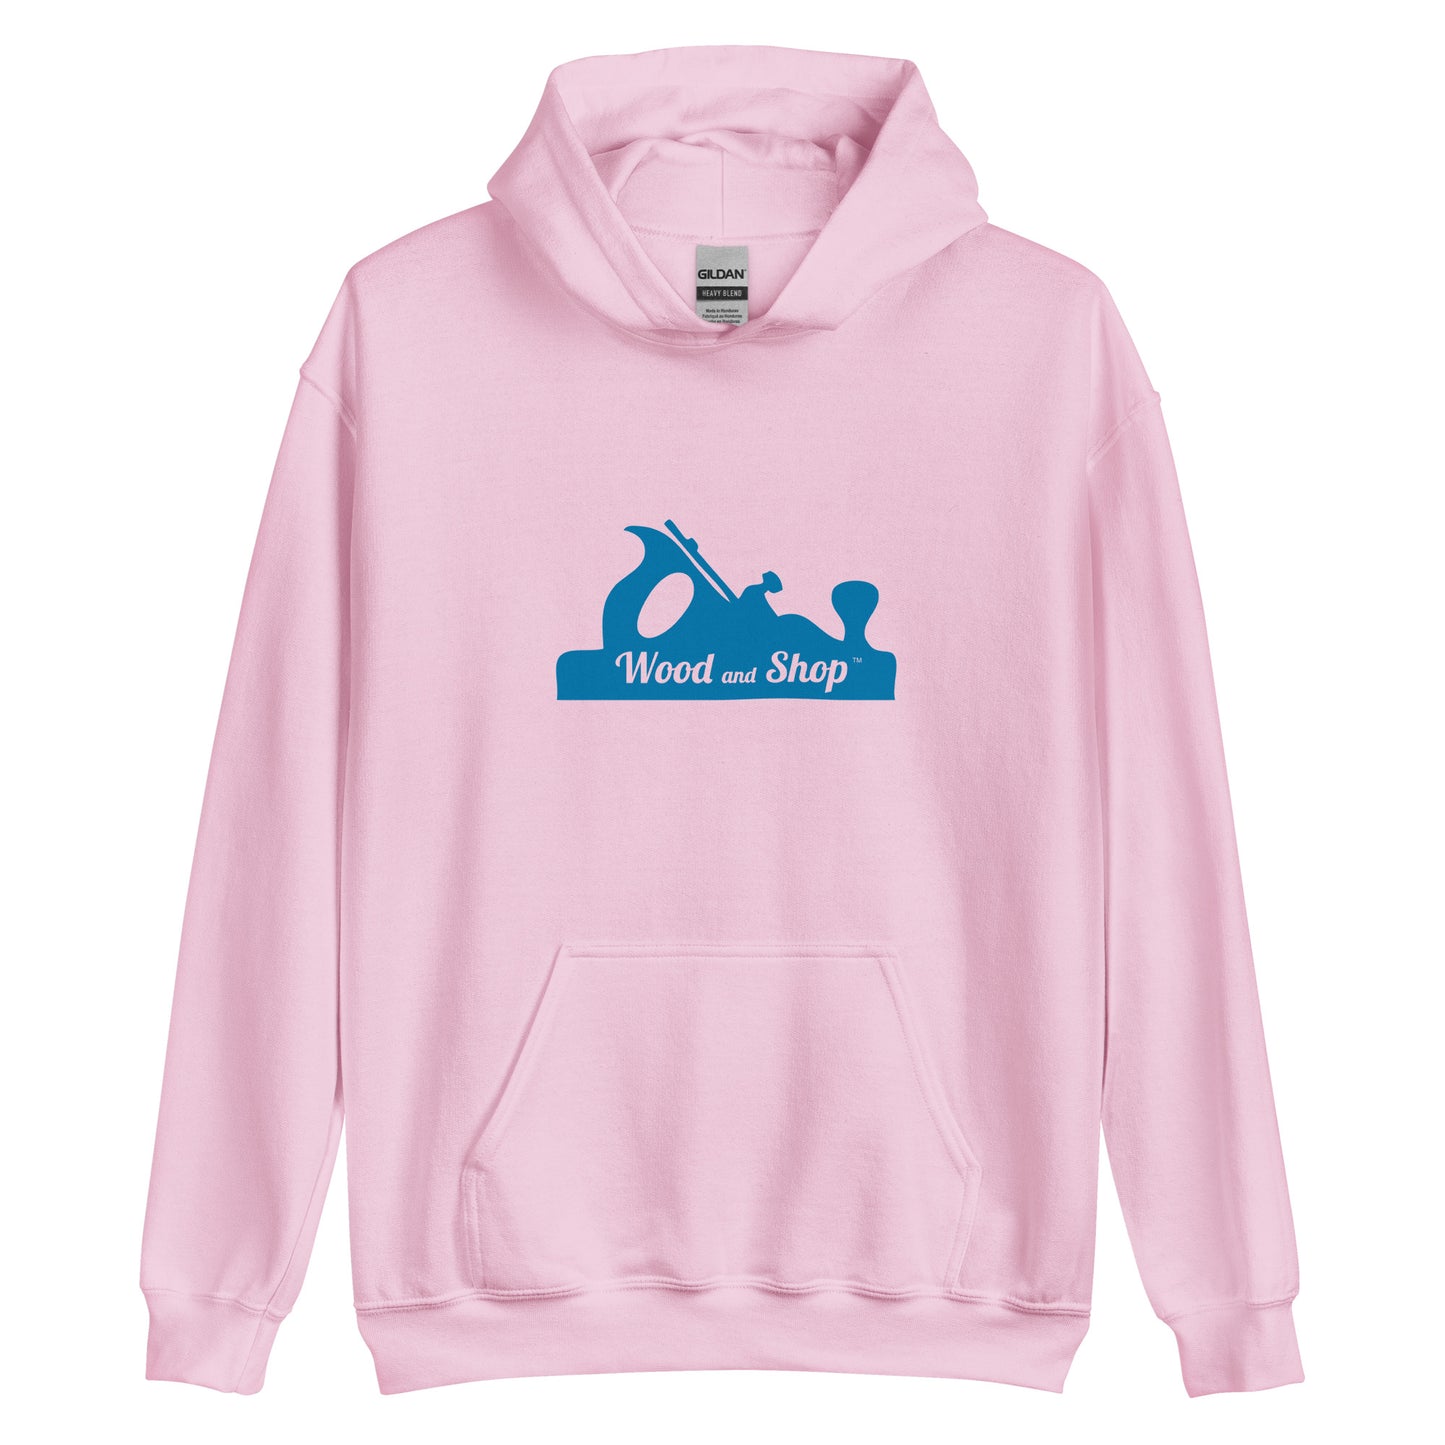 "Wood and Shop" Logo Unisex Hoodie for Woodworkers (Multiple Colors)